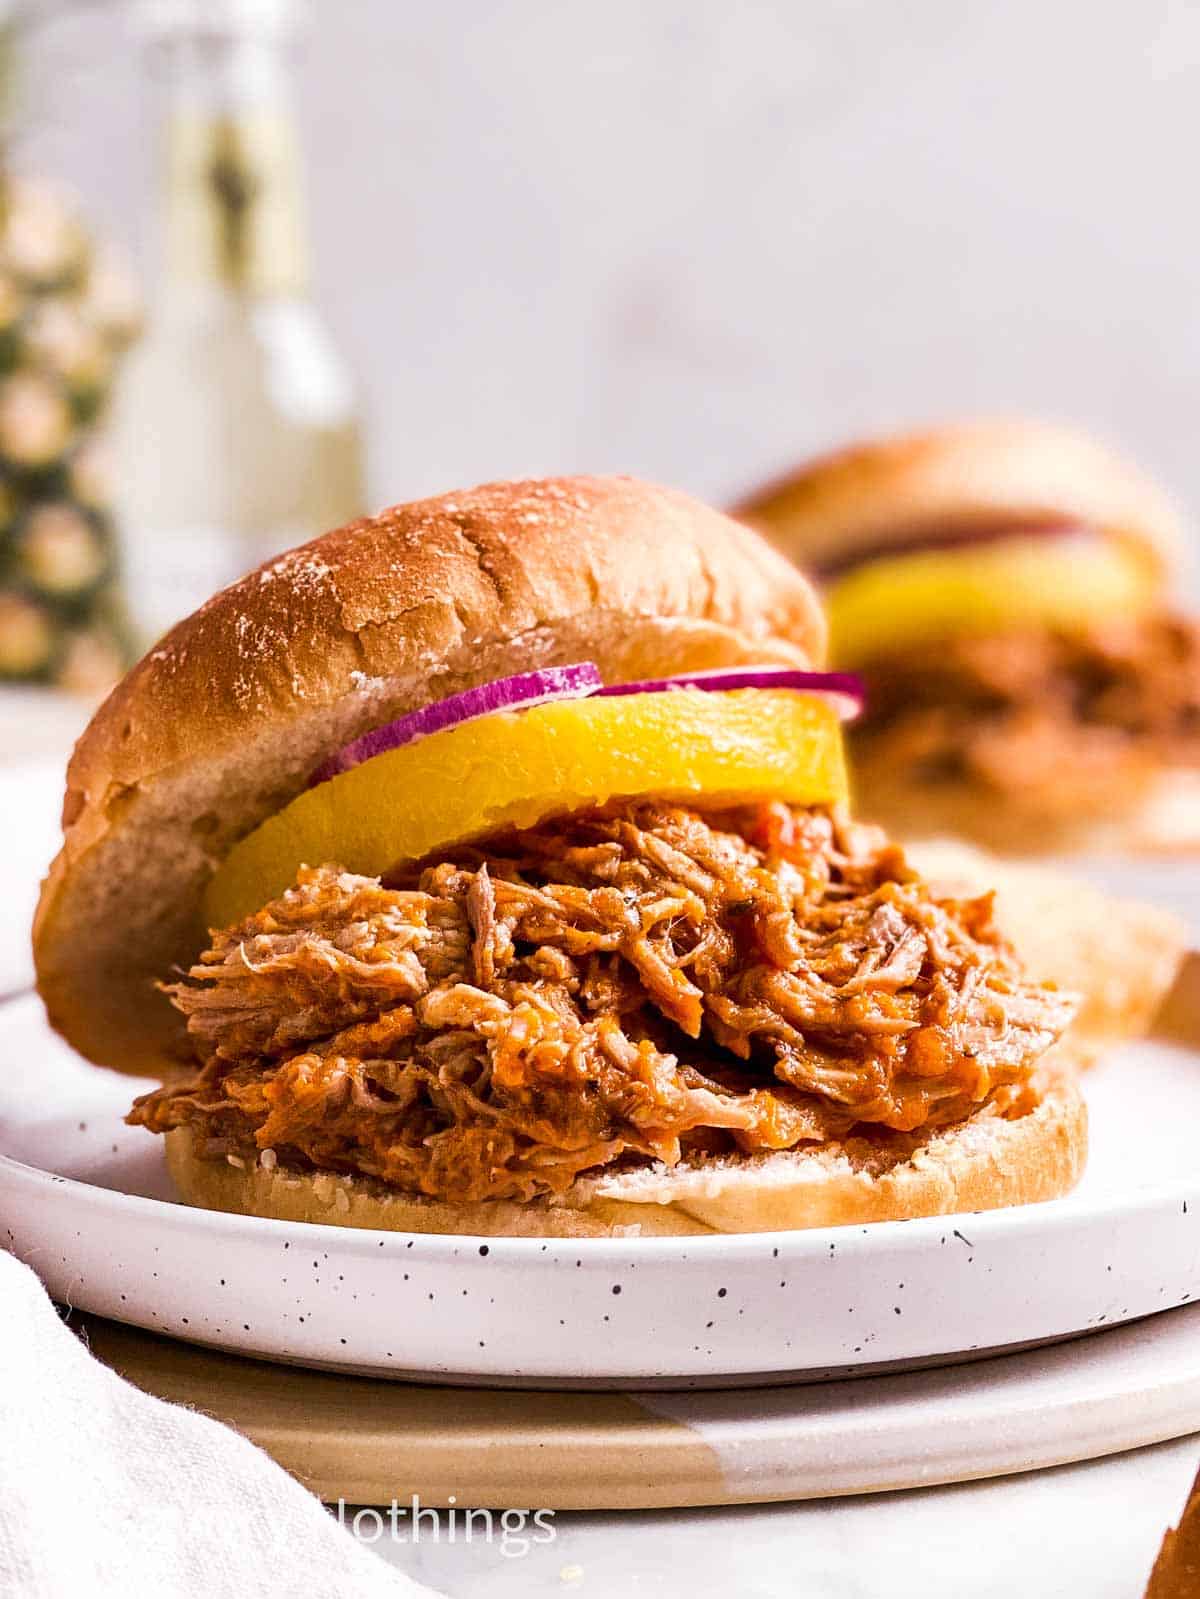 pineapple pulled pork on sandwich bun with canned pineapple ring